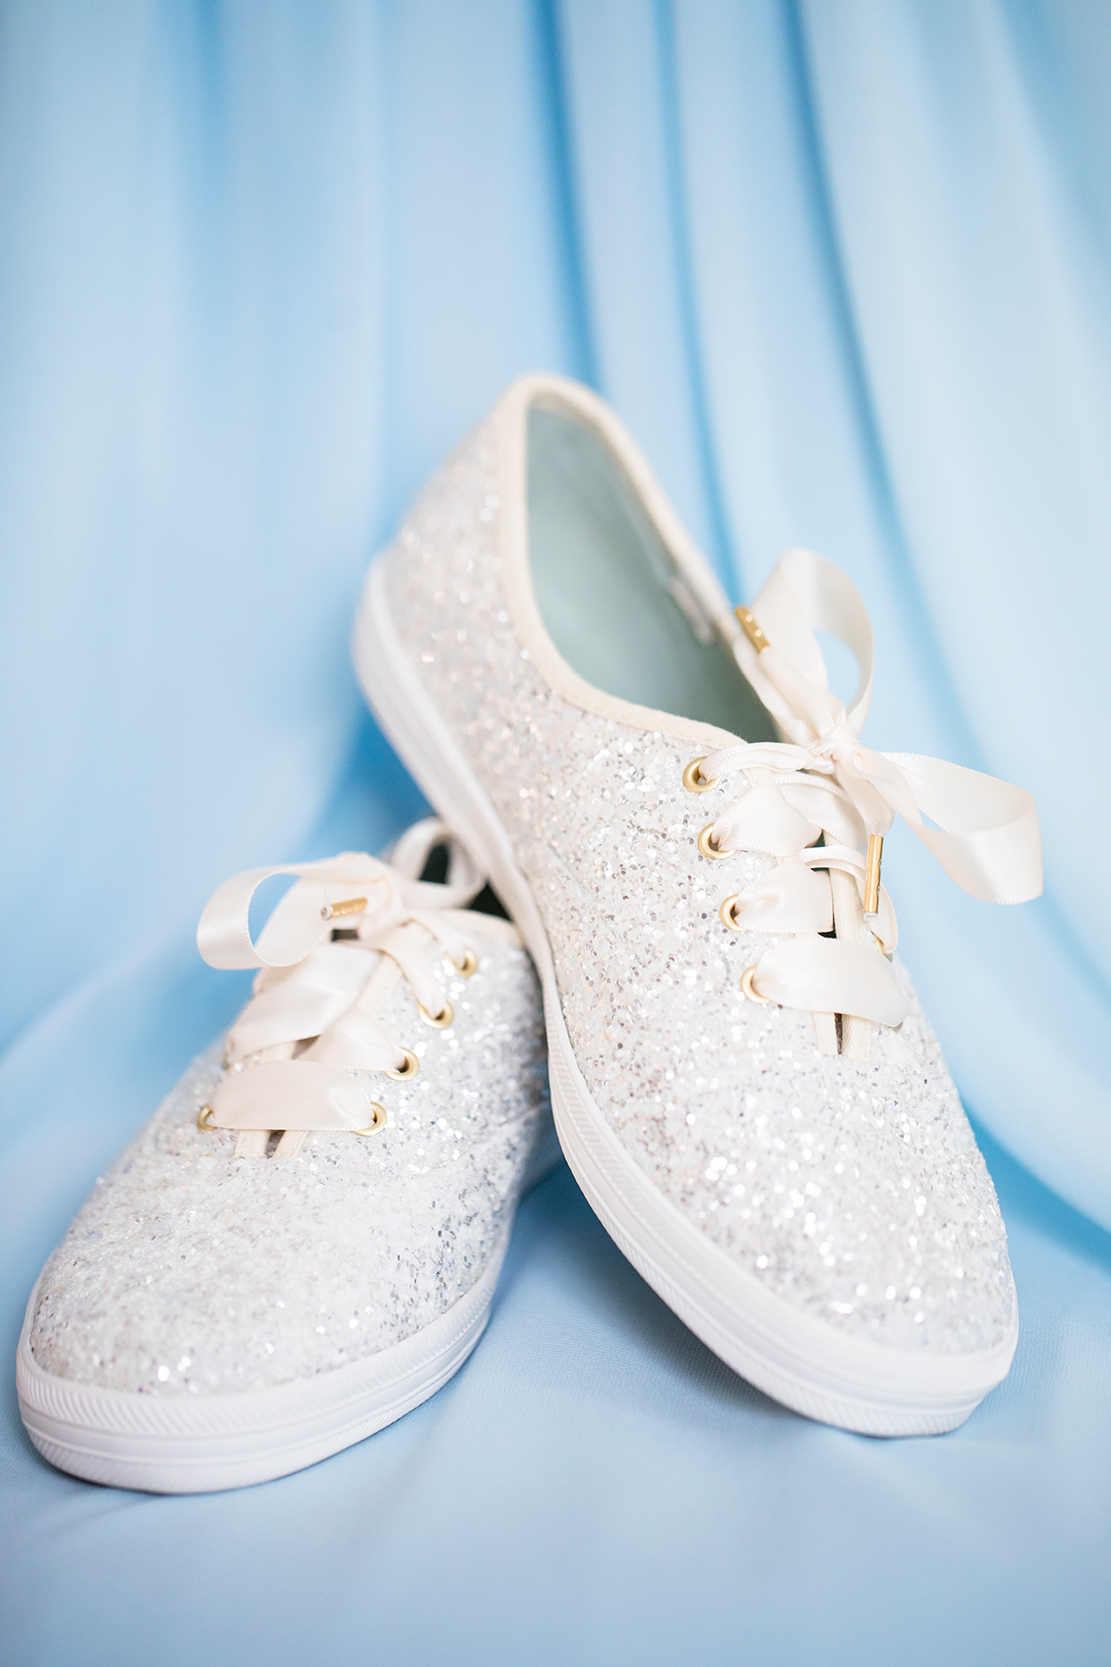 Finding the Shoe that Fits Your Wedding - Image Property of www.j-dphoto.com